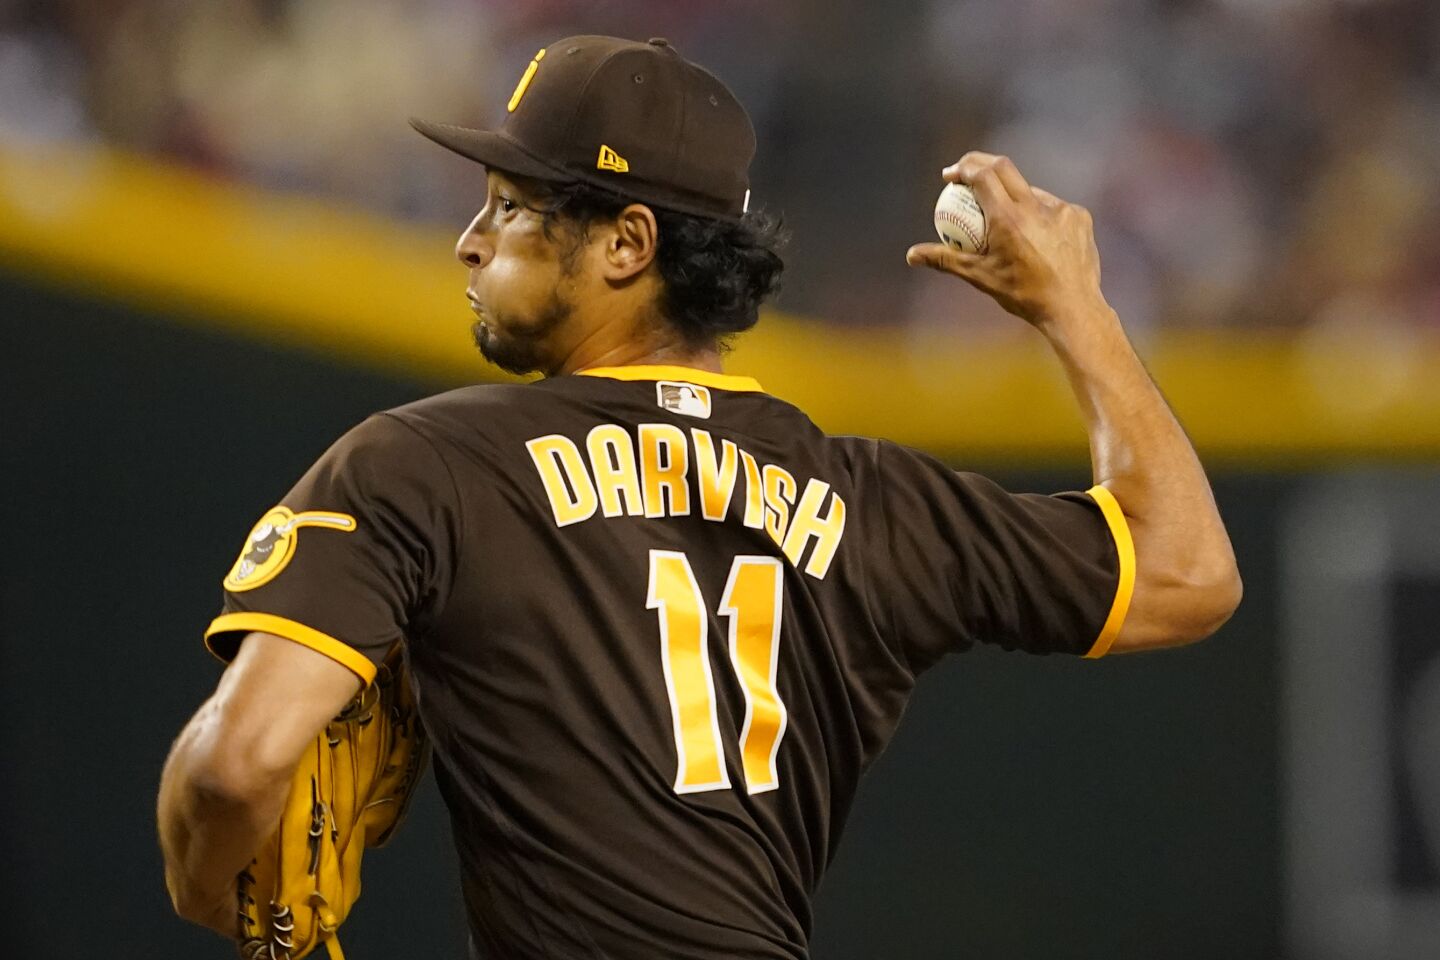 Game 2: Padres RHP Yu Darvish (0-0, 0.00 ERA)The 35-year-old walked (4) more than he struck out (3) on opening day but did not allow a hit over six shutout innings. He has a 5.40 ERA in seven career starts against the Giants, including a 6.35 ERA in three career starts at Oracle Park. He allowed eight runs in four innings in his lone start in San Francisco last year.